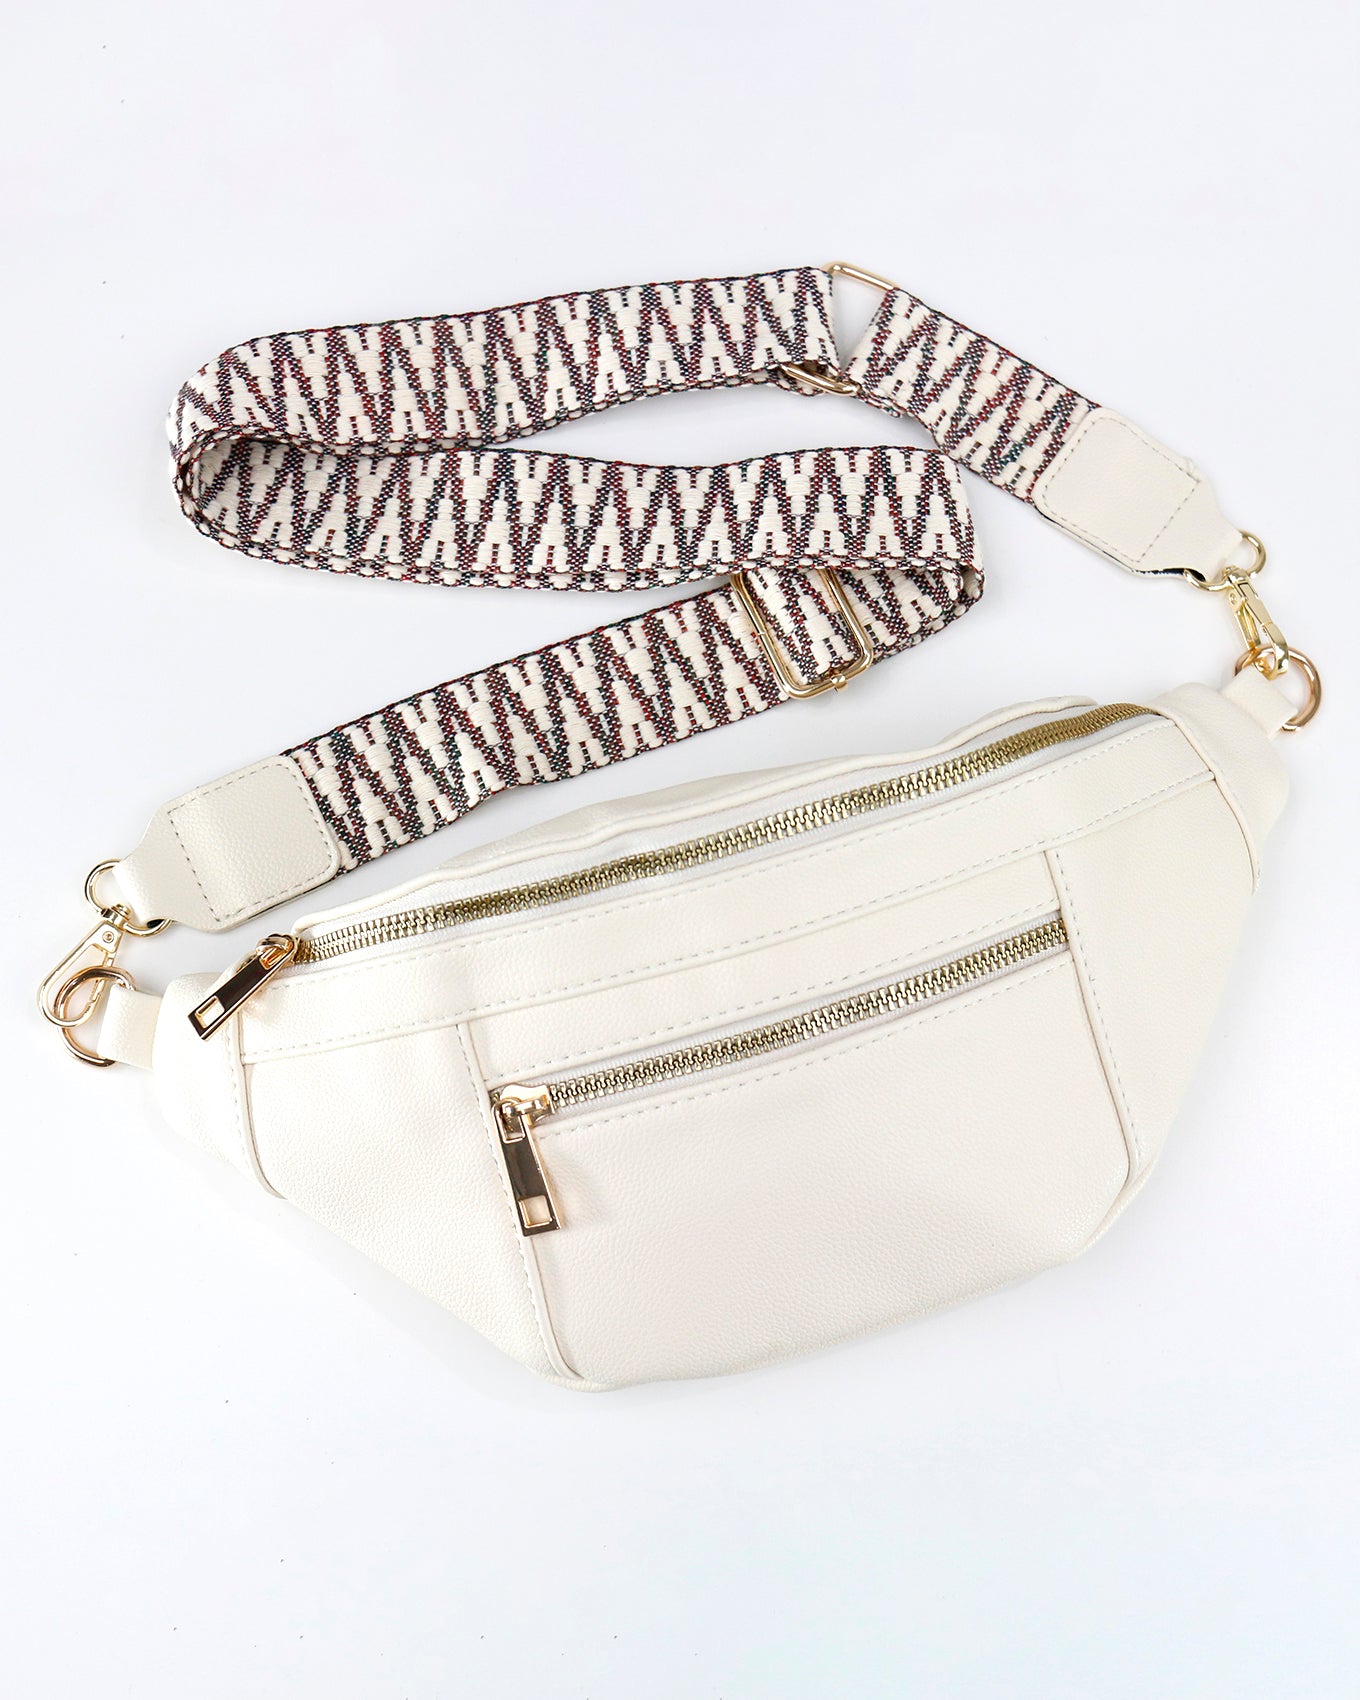 Alternate strap stock shot of Ivory Faux Leather Belt Bag with Guitar Strap